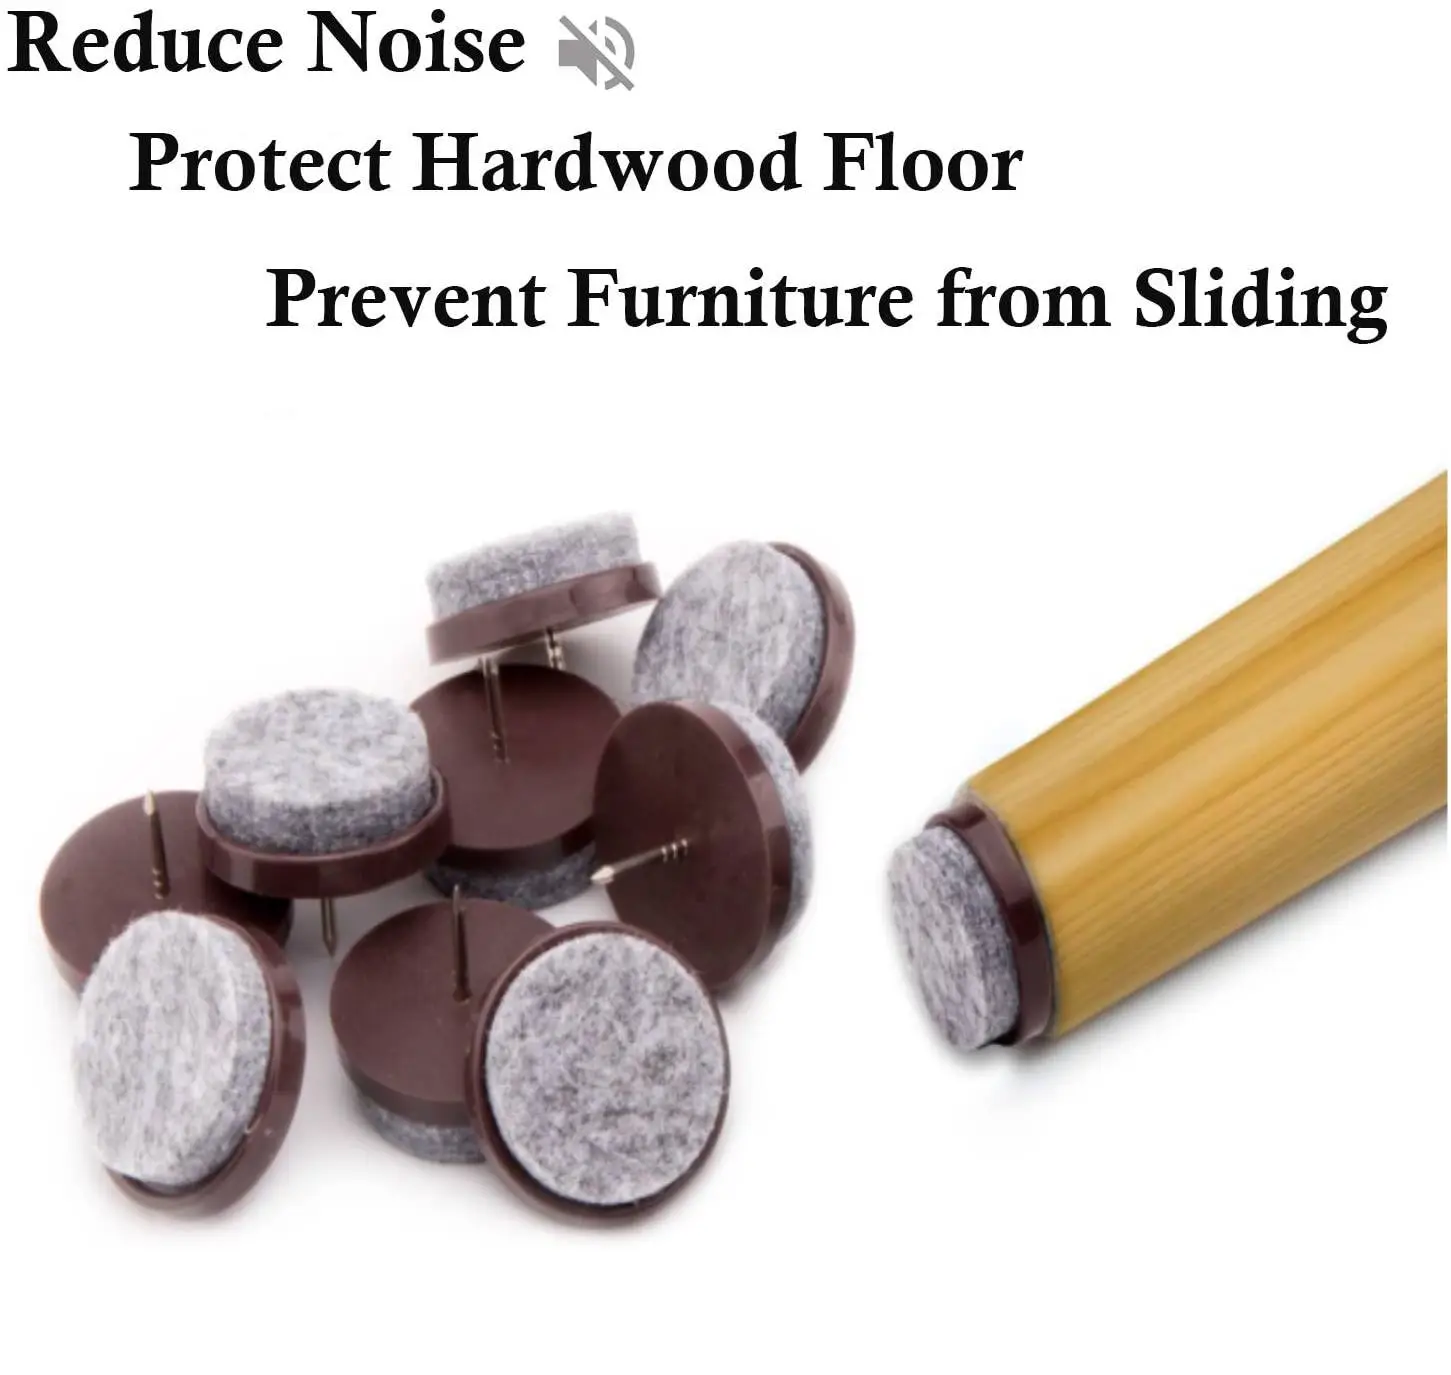 20pcs Slider Glide Pad Round Nail-on Furniture Felt Pad Reduce Noise Floor Protector for Cabinet Sofa Couch Chair Table Leg Feet